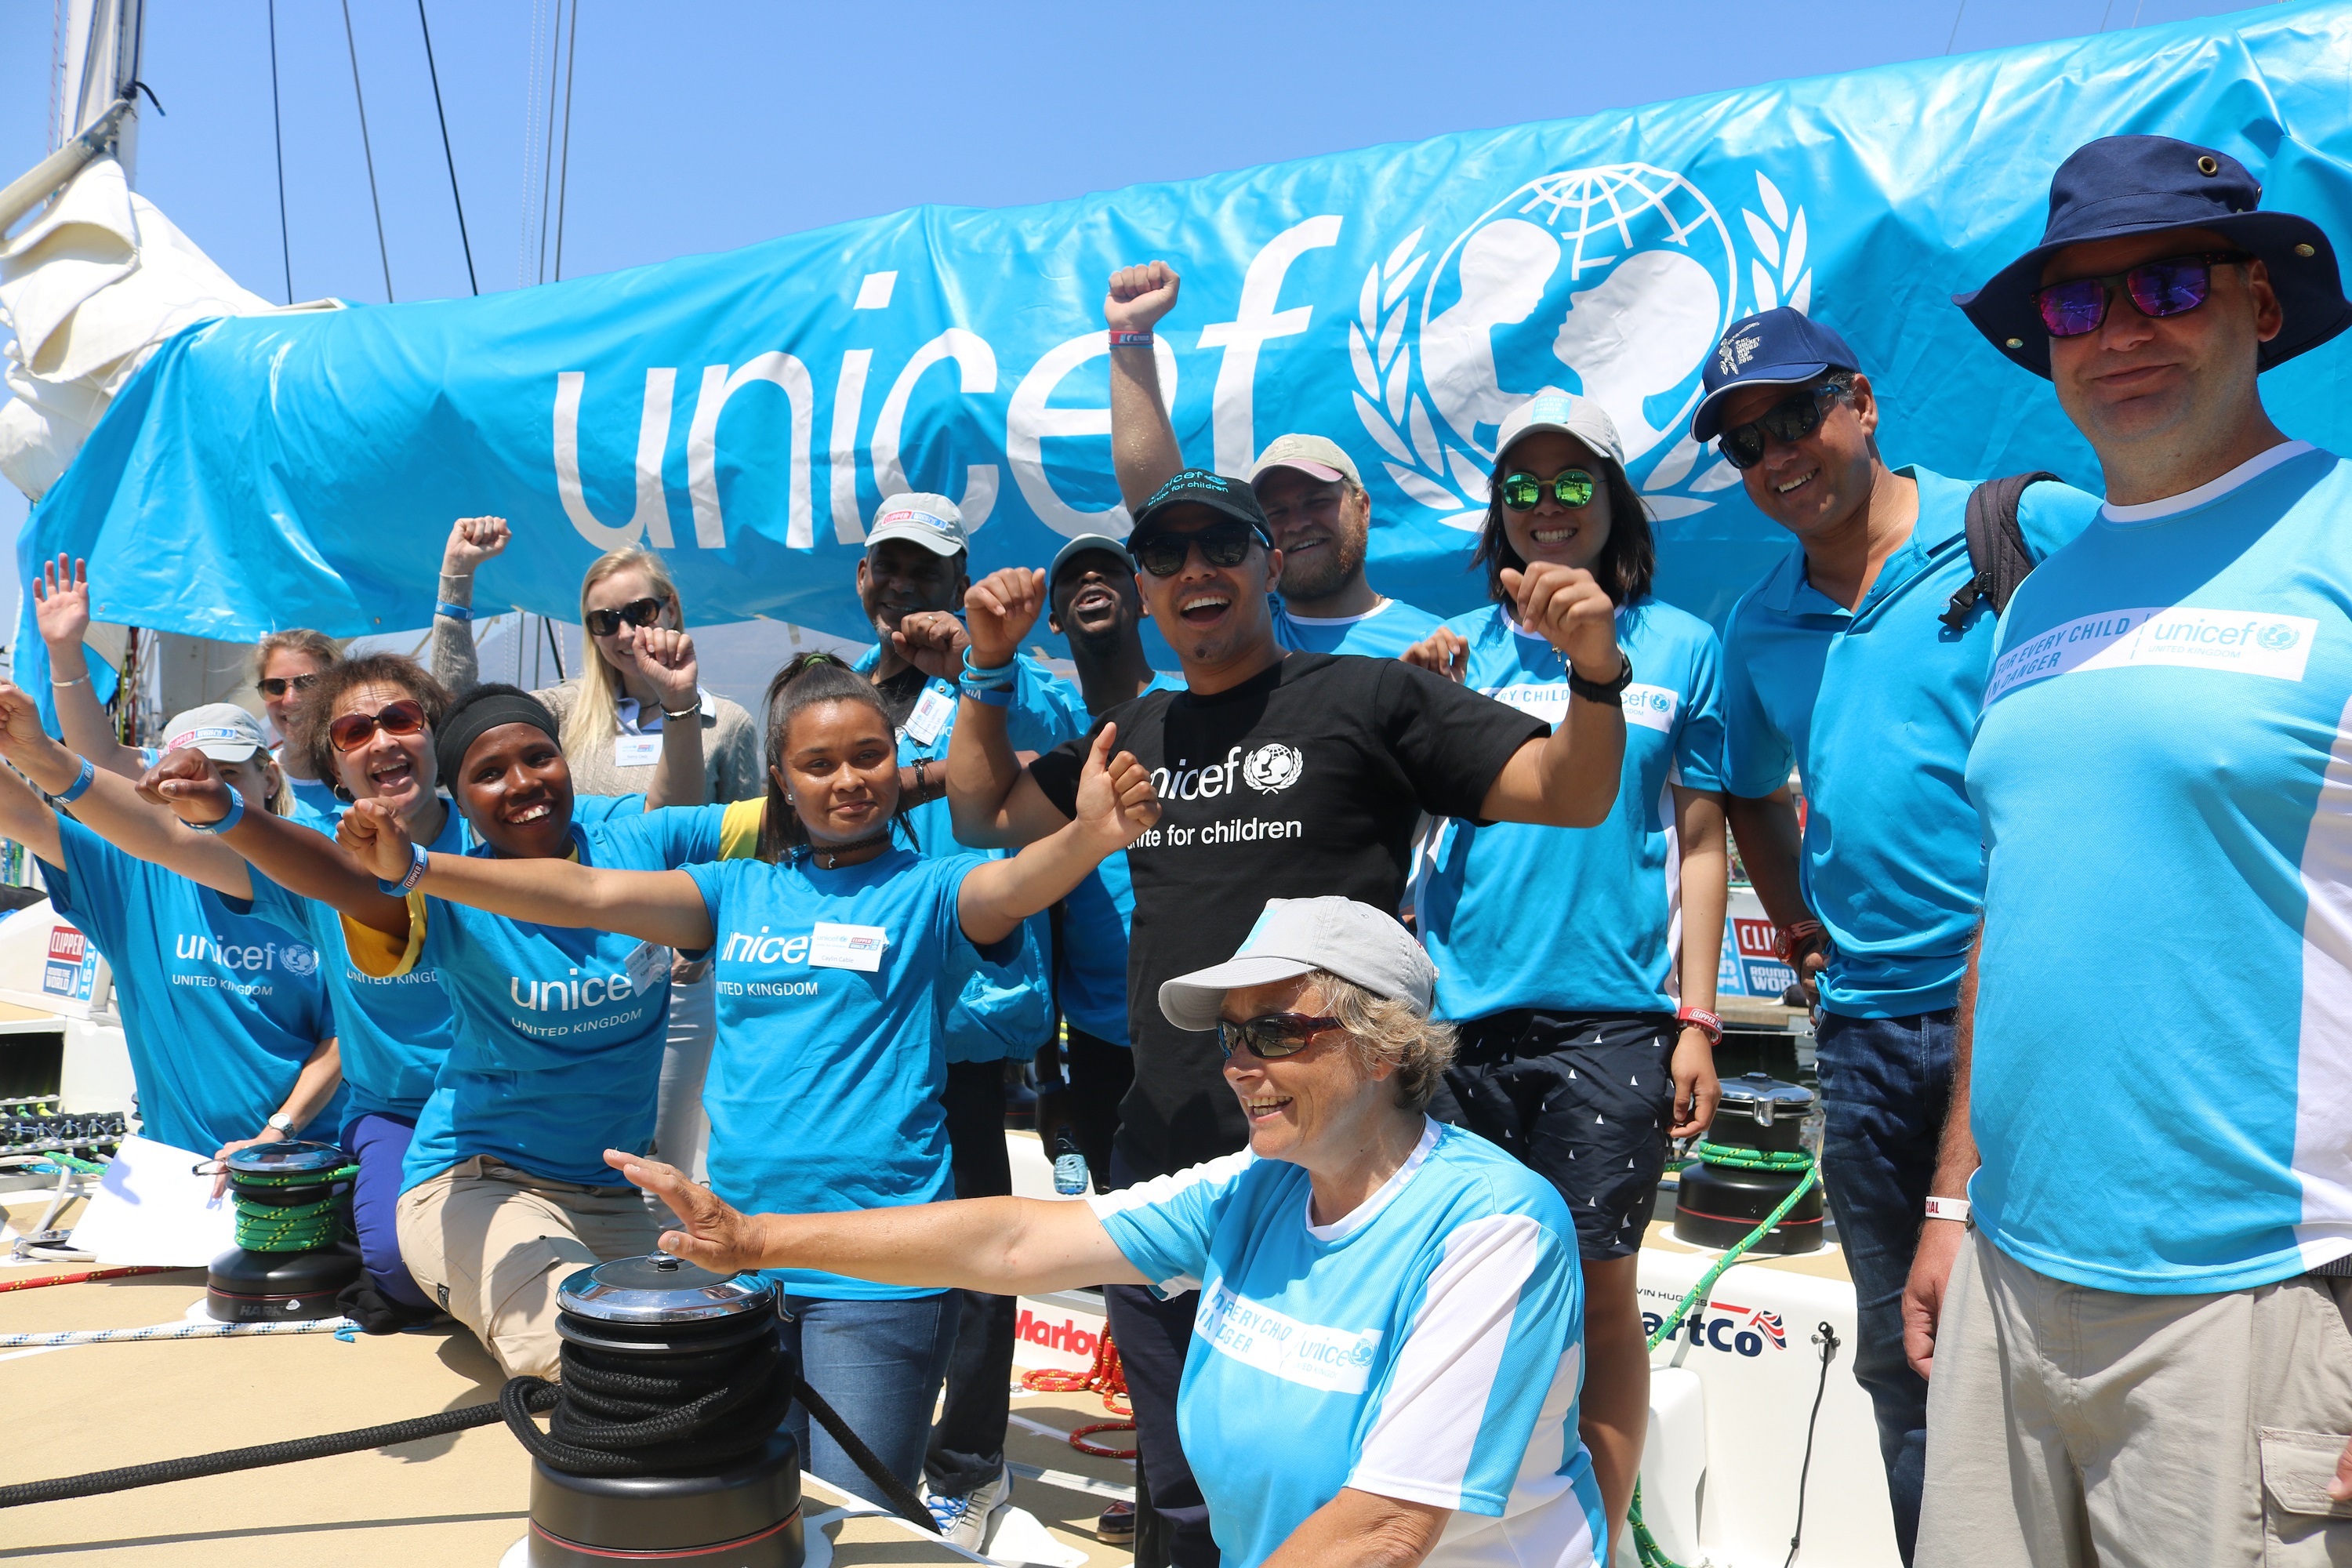 Image of crew fundraising for Unicef during the Clipper 15-16 Race